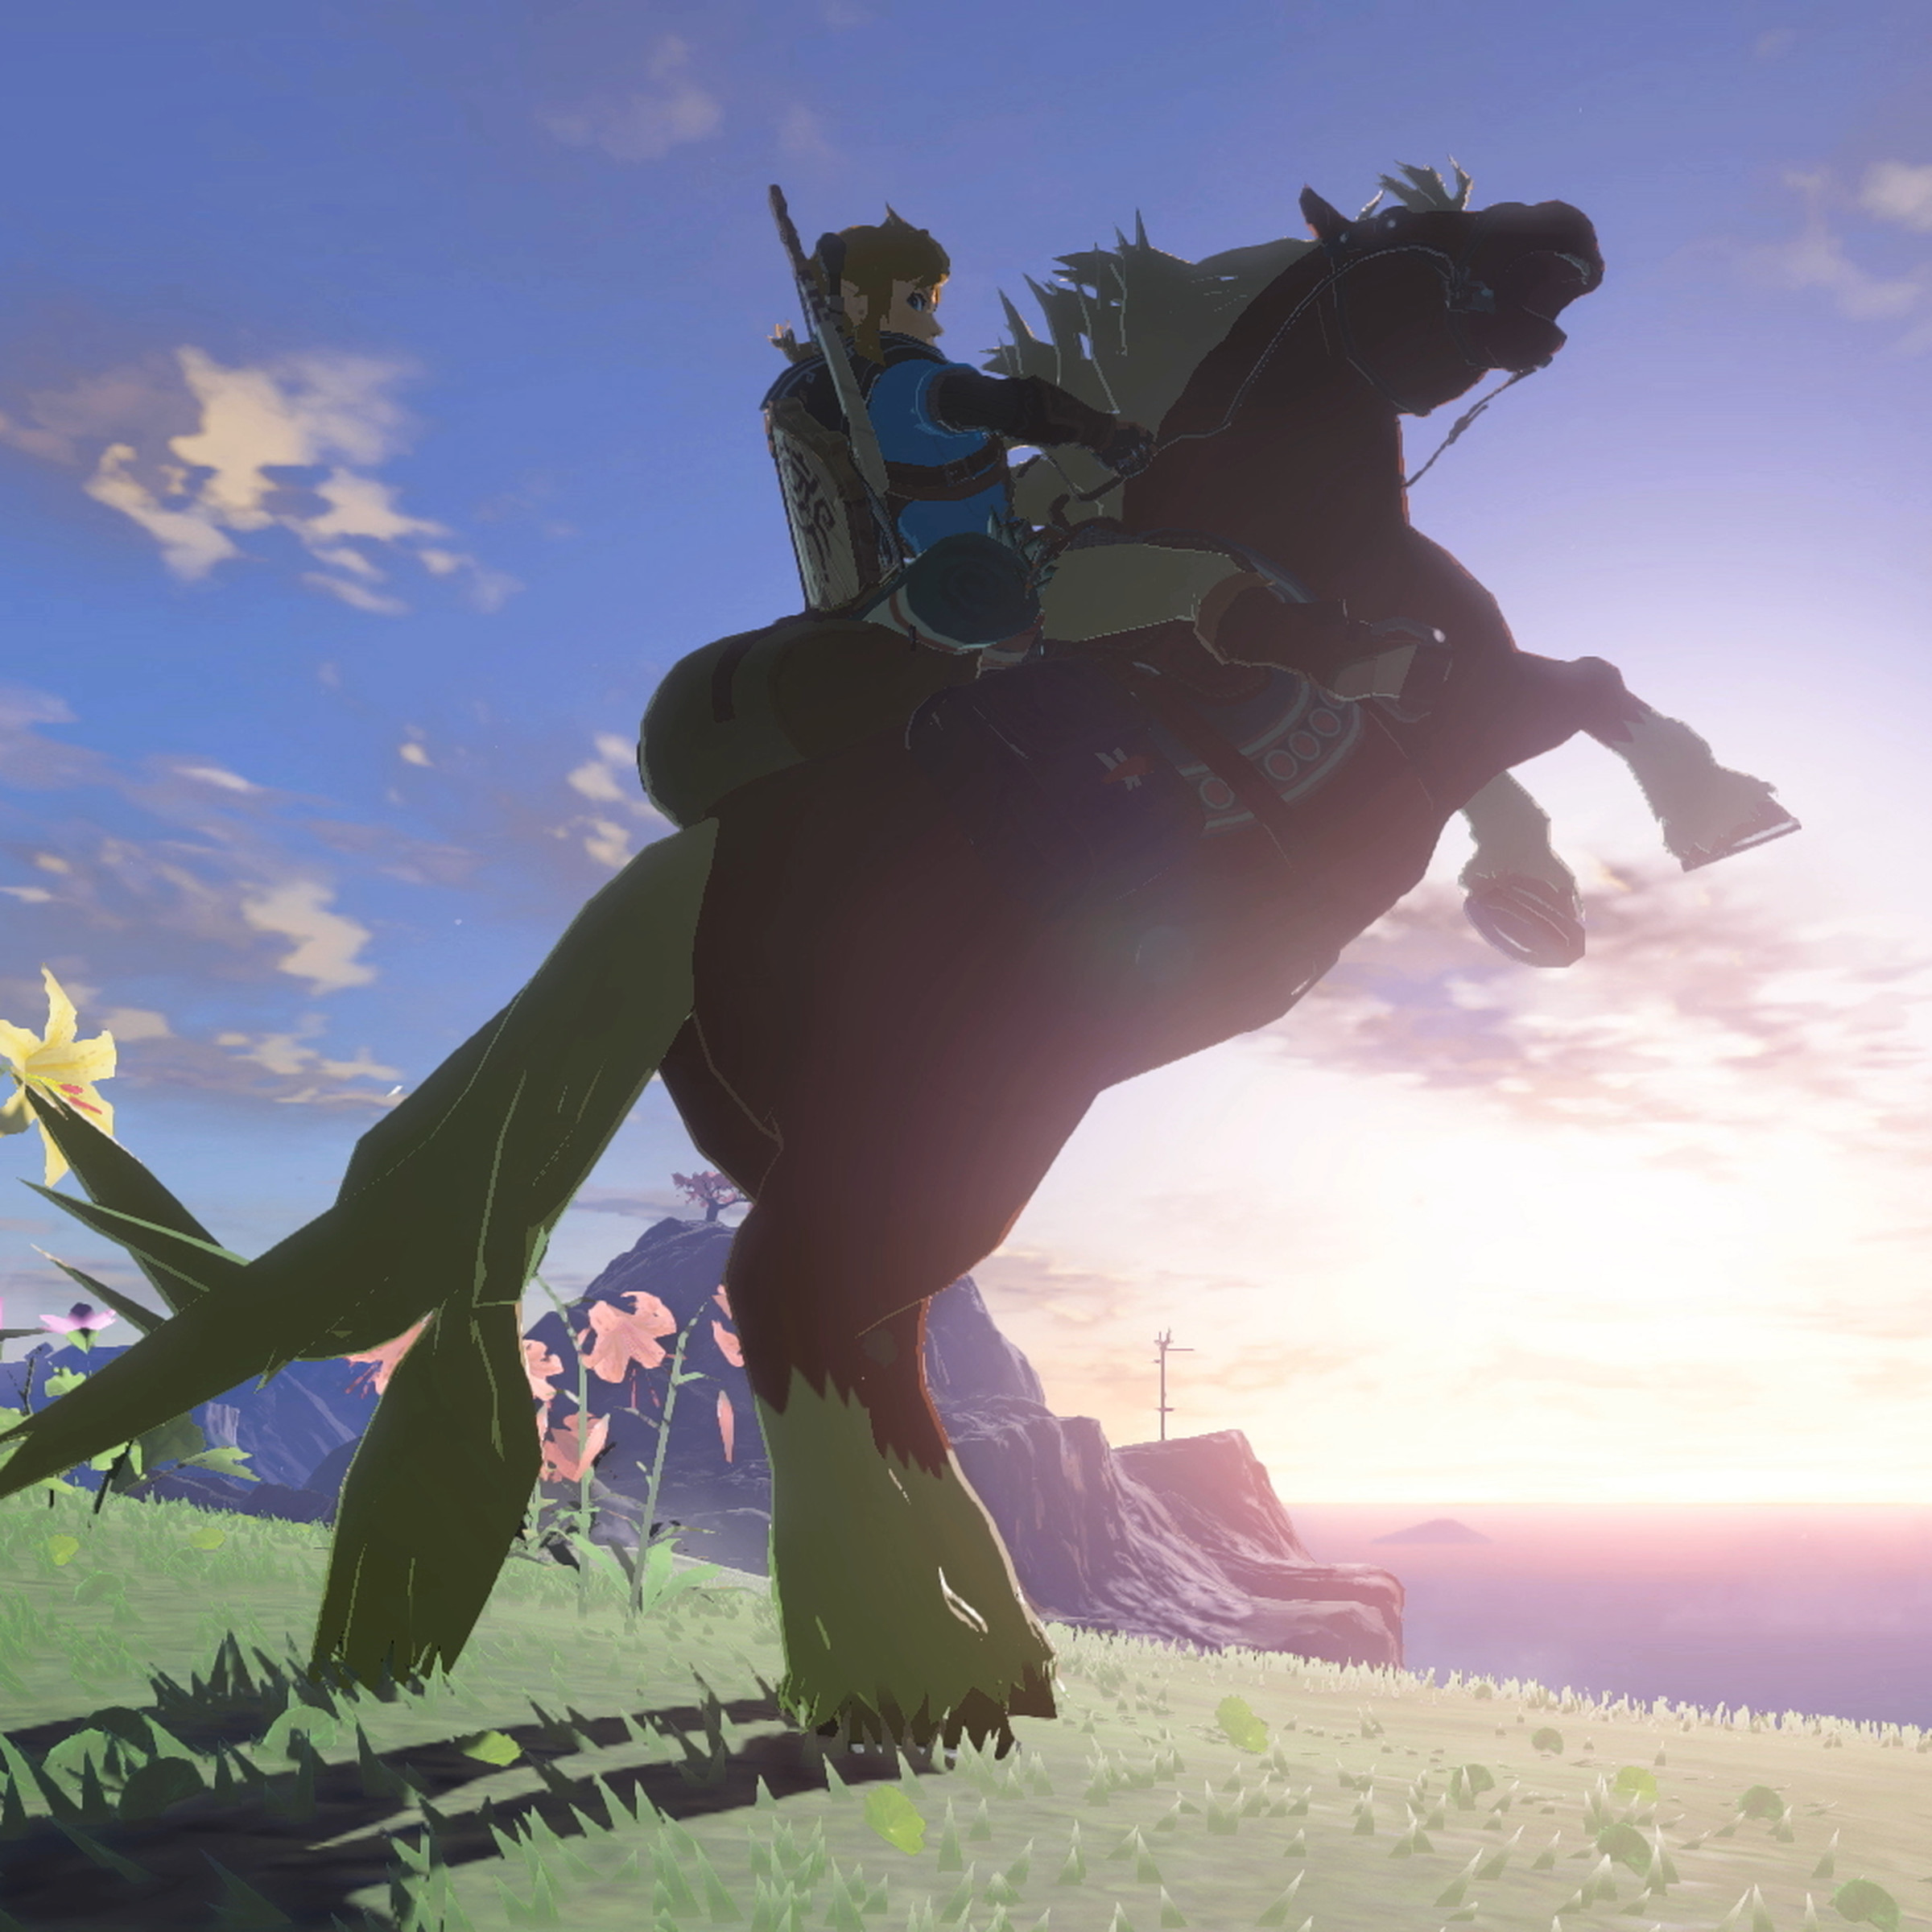 In a screenshot from The Legend of Zelda: Tears of the Kingdom, Link rides a horse in front of a sun-filled horizon.